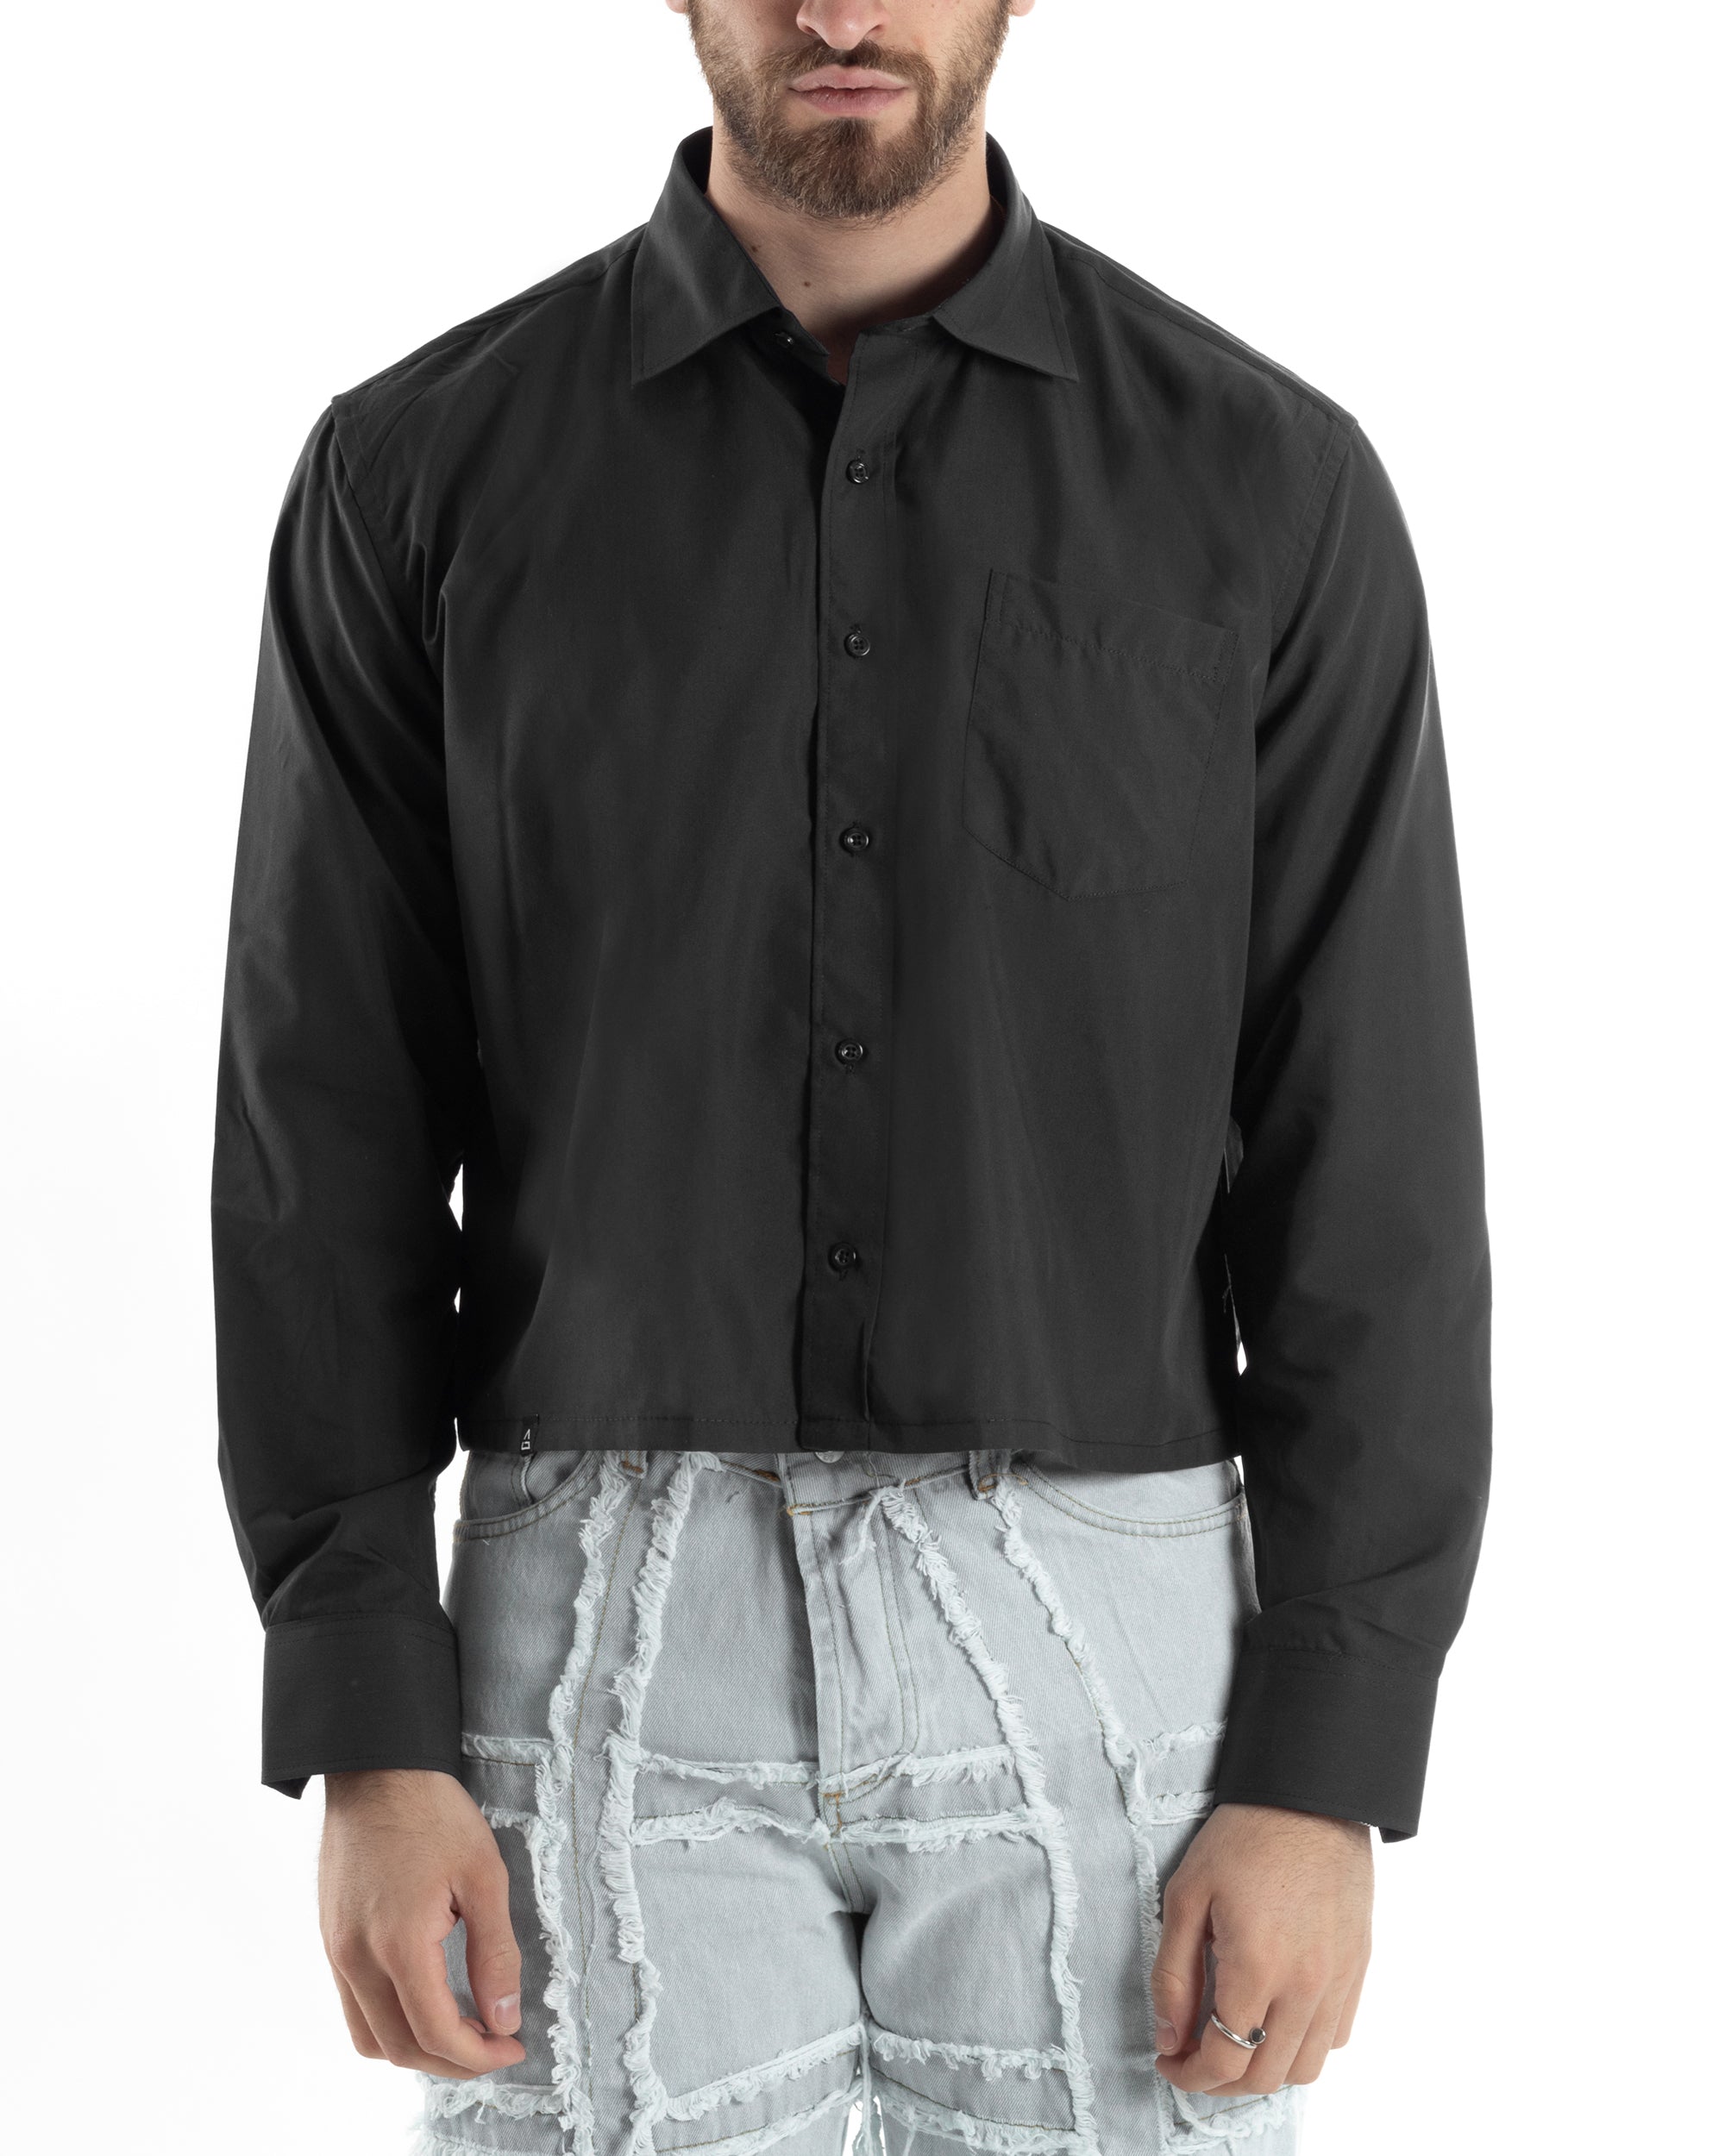 Men's Short Sleeve Shirt Cropped Solid Color Black Boxy Fit Casual GIOSAL-CC1175A